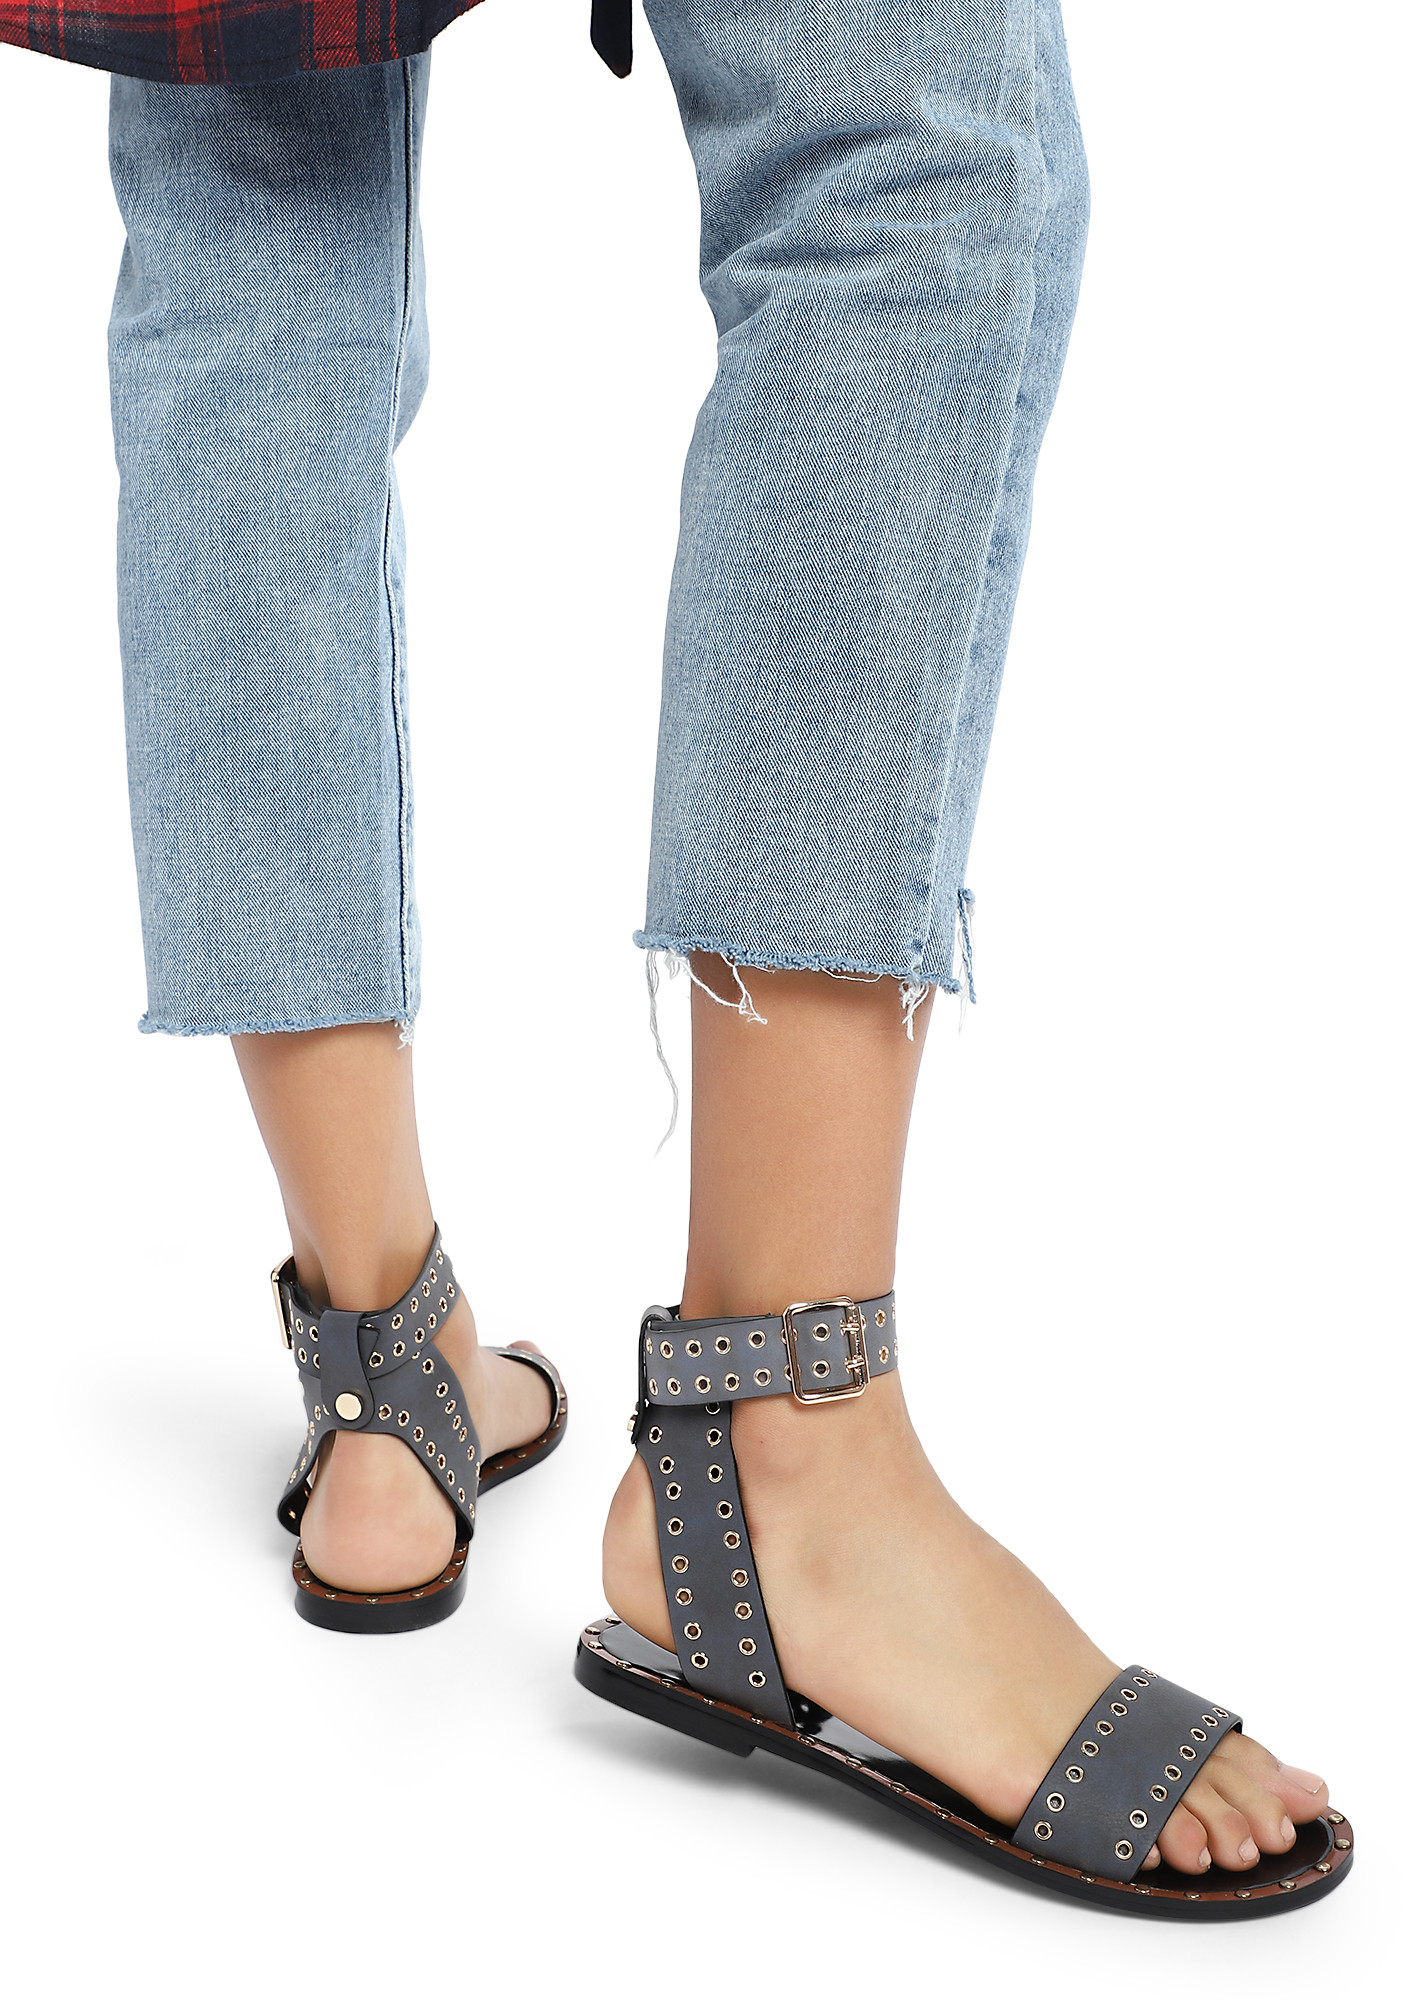 SAY IT TO MY EYES BLUE GREY FLAT SANDALS